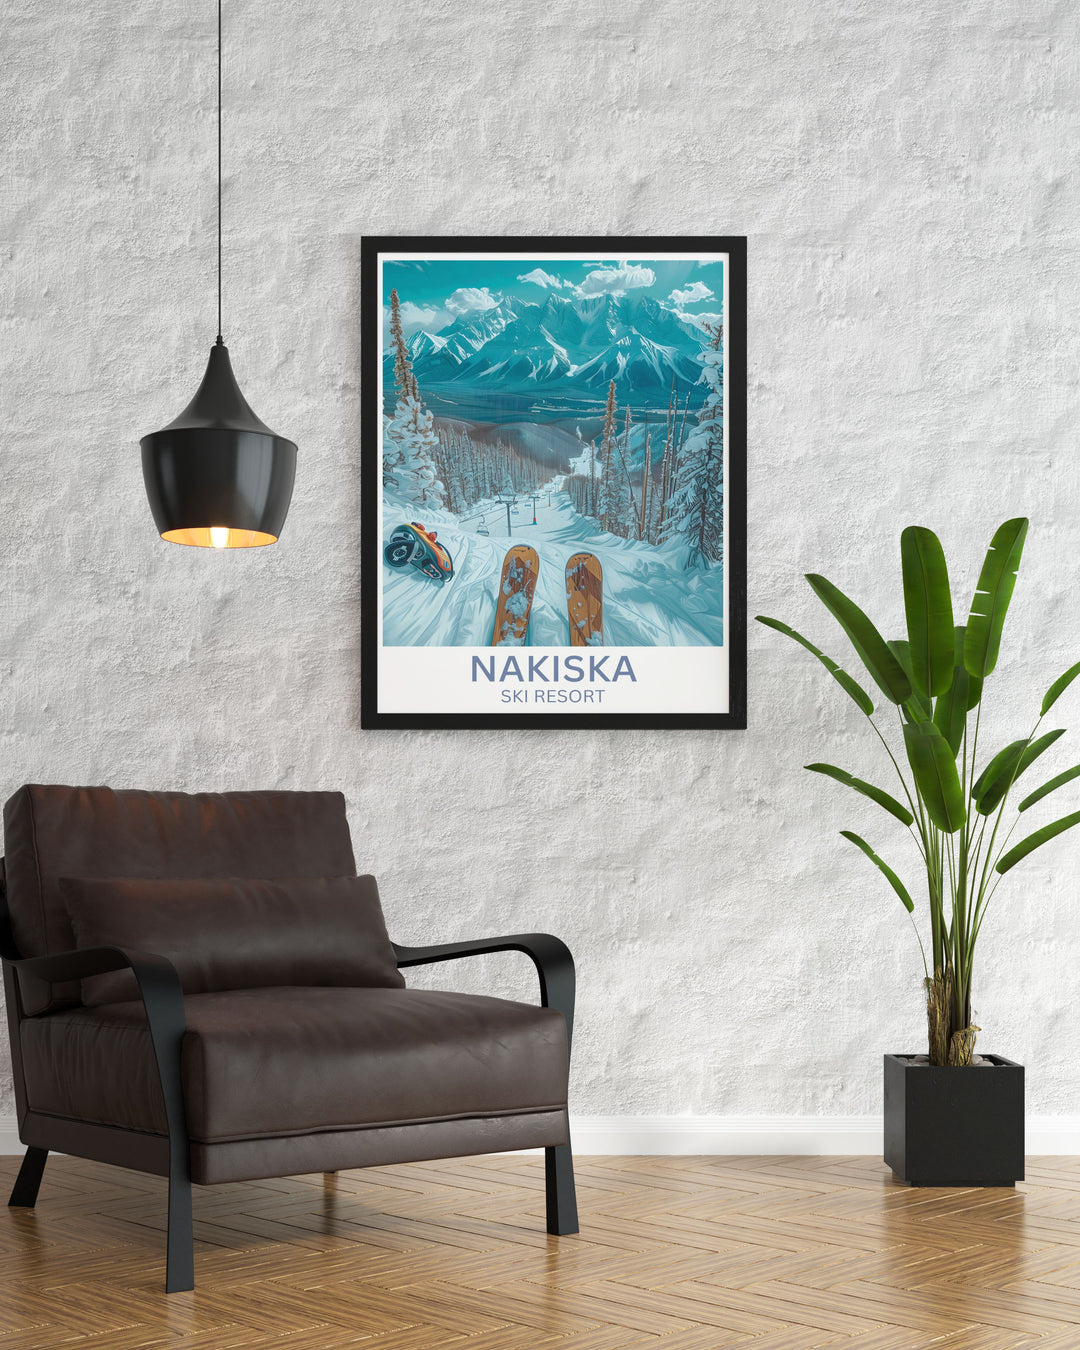 Retro travel poster of Kananaskis Valley, ideal for collectors of Canadian travel memorabilia.